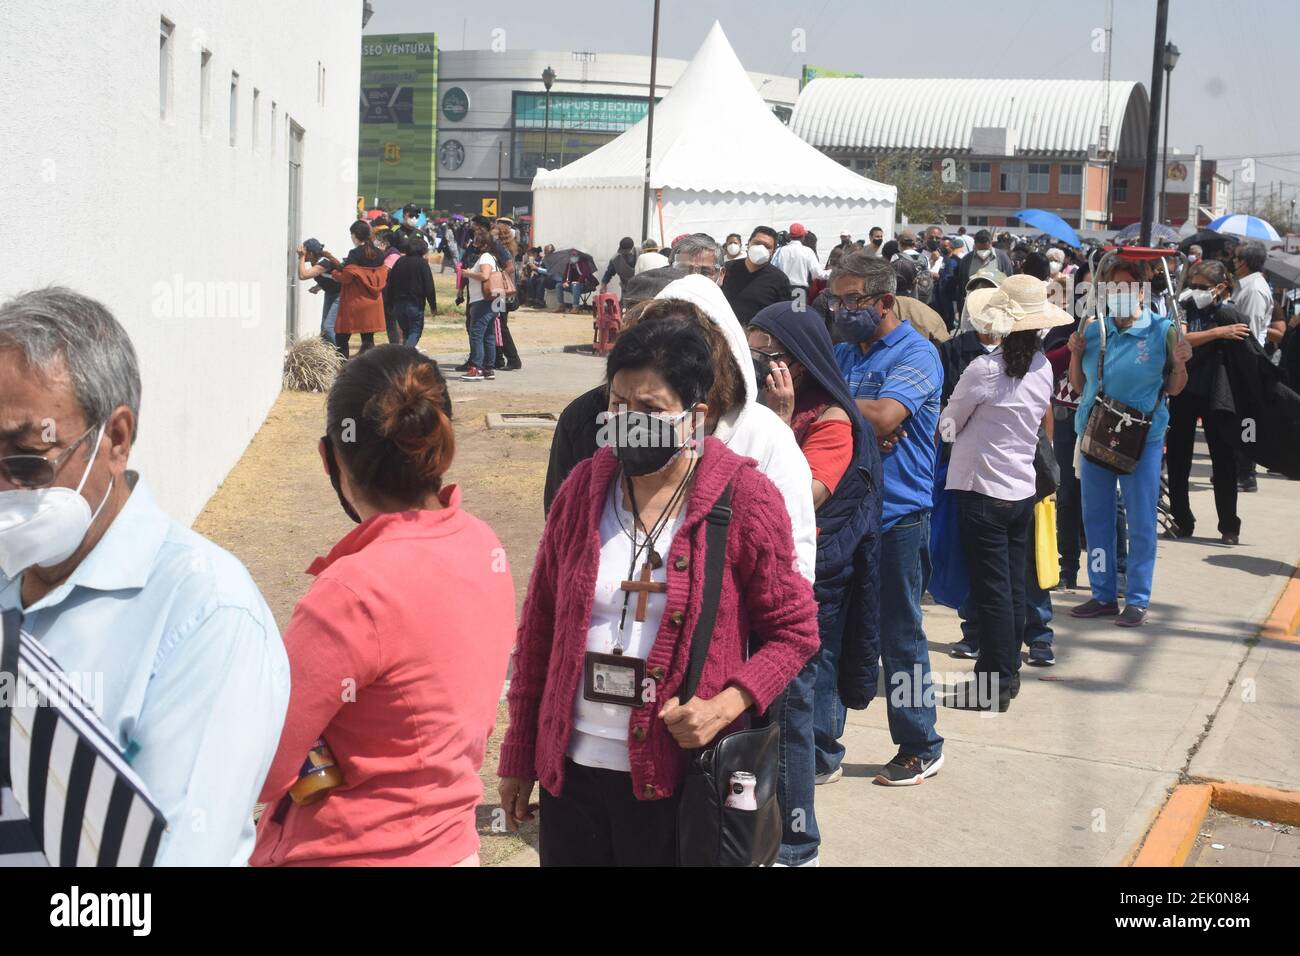 Persons wait to be injected with a dose of Sinovac vaccine against coronavirus disease (COVID-19) , during a mass vaccination to elderly persons at Las Americas Sport Center on February 22, 2021 in Ecatepec, State of Mexico, Mexico. Photo by Jose M. Ruiz/Eyepix/ABACAPRESS.COM Stock Photo